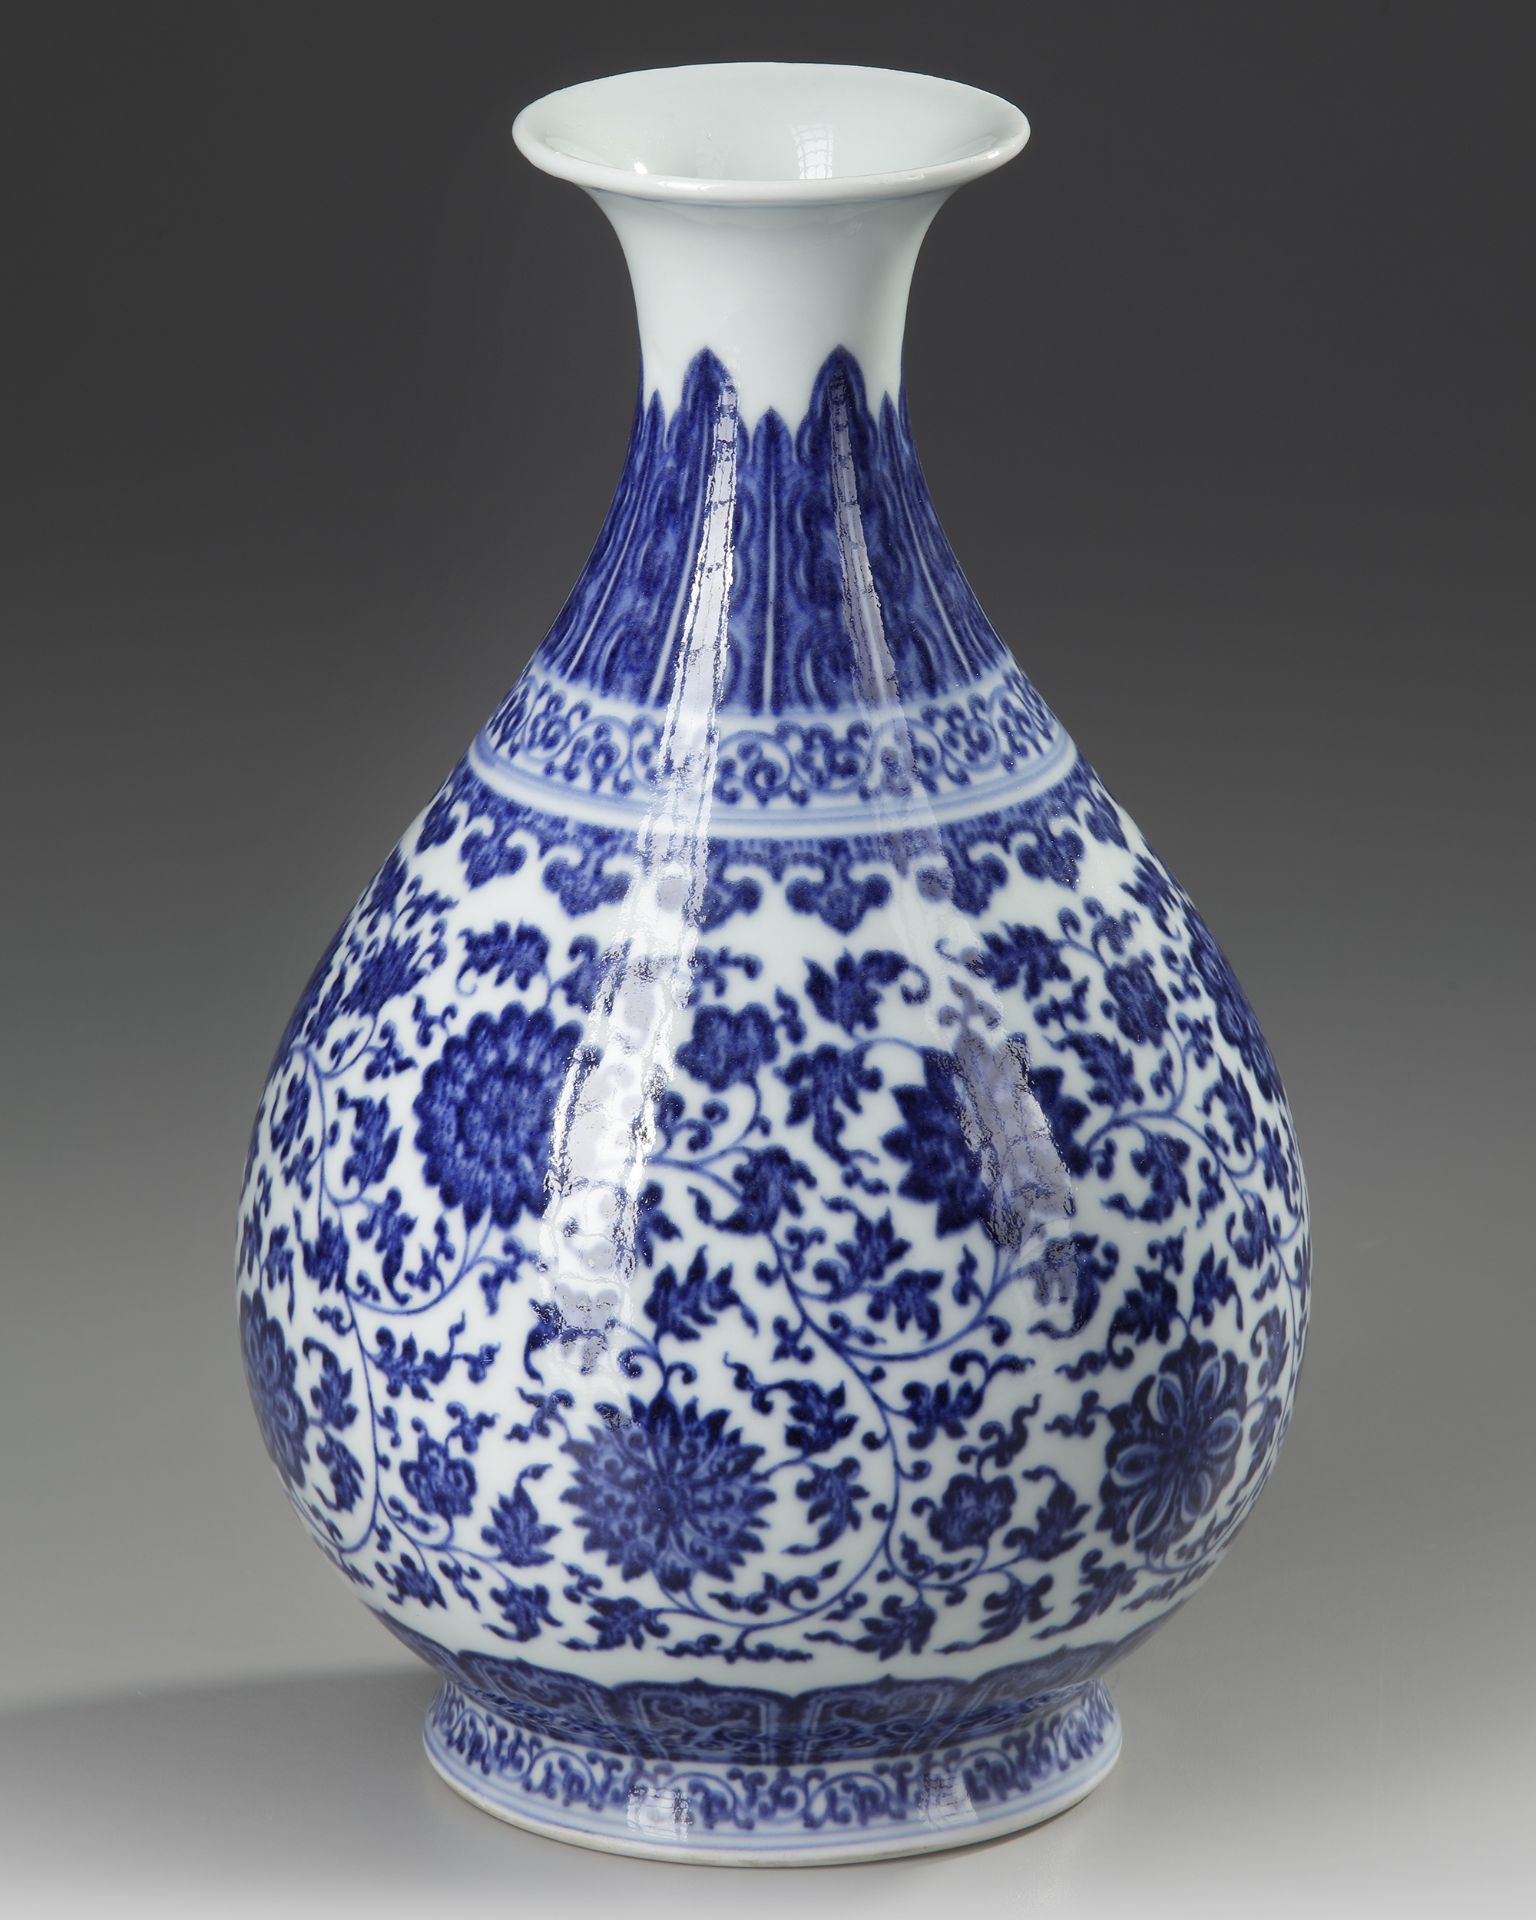 A CHINESE UNDER-GLAZE BLUE AND WHITE MING-STYLE PEAR SHAPED VASE, QING DYNASTY (1644-1911) - Bild 2 aus 4